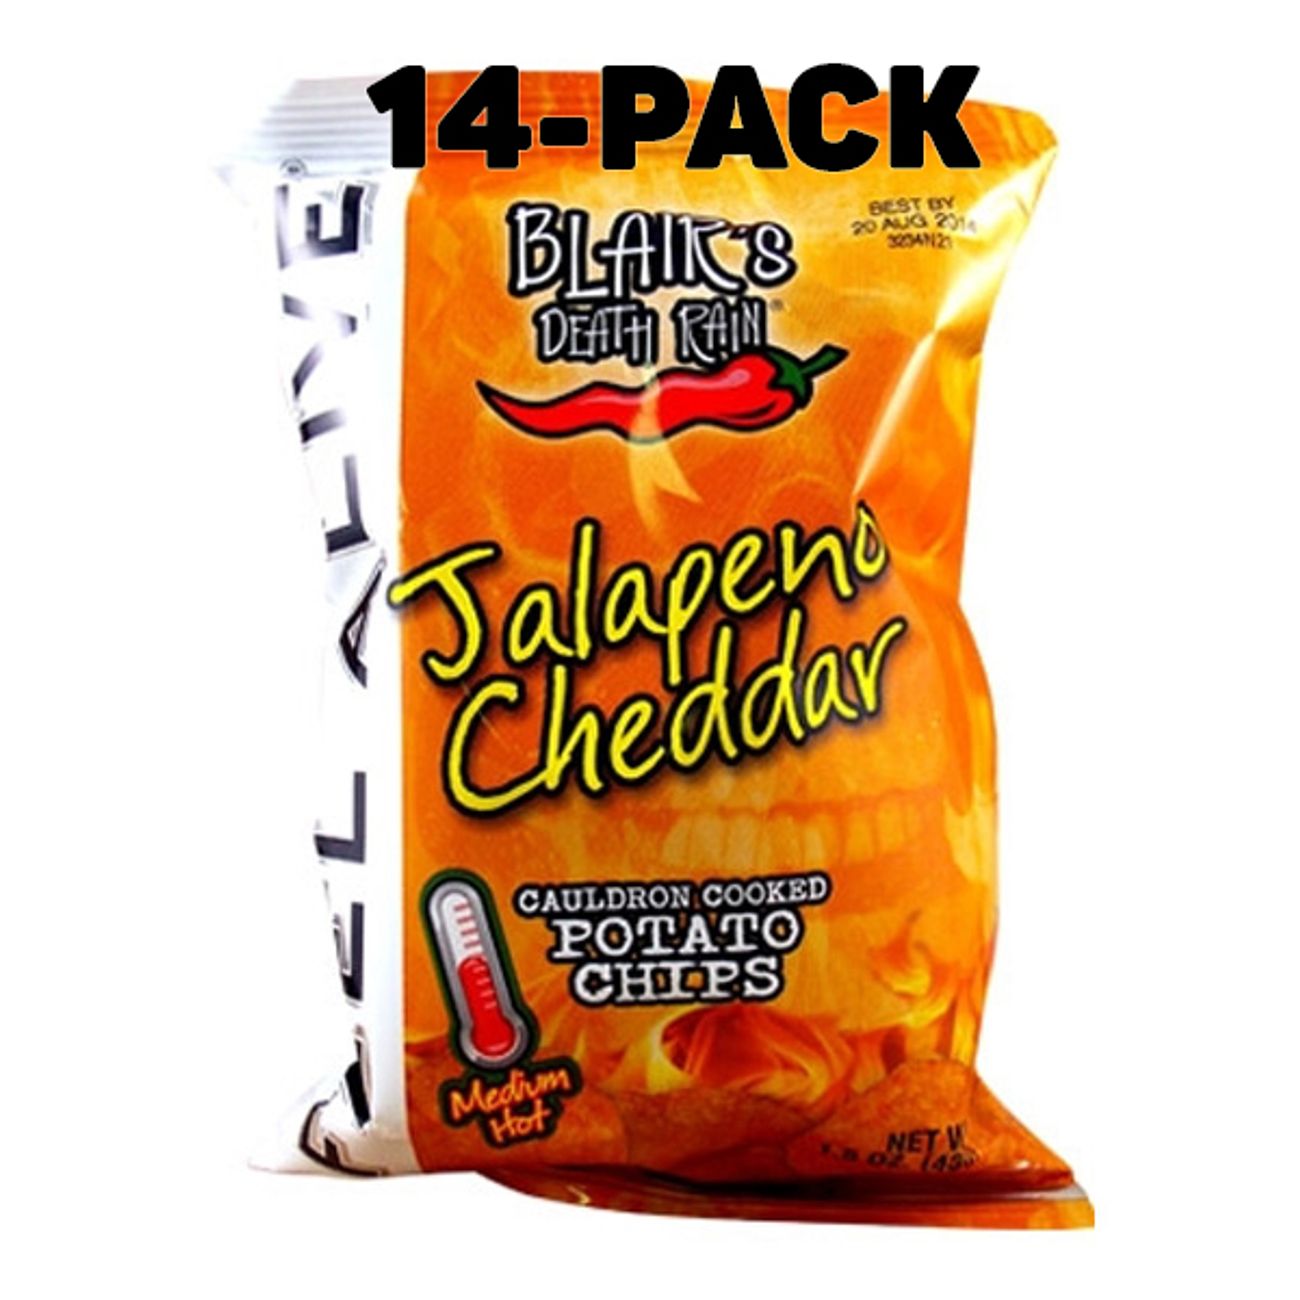 blairs-kettle-chips-cheddar-jalapeno-2